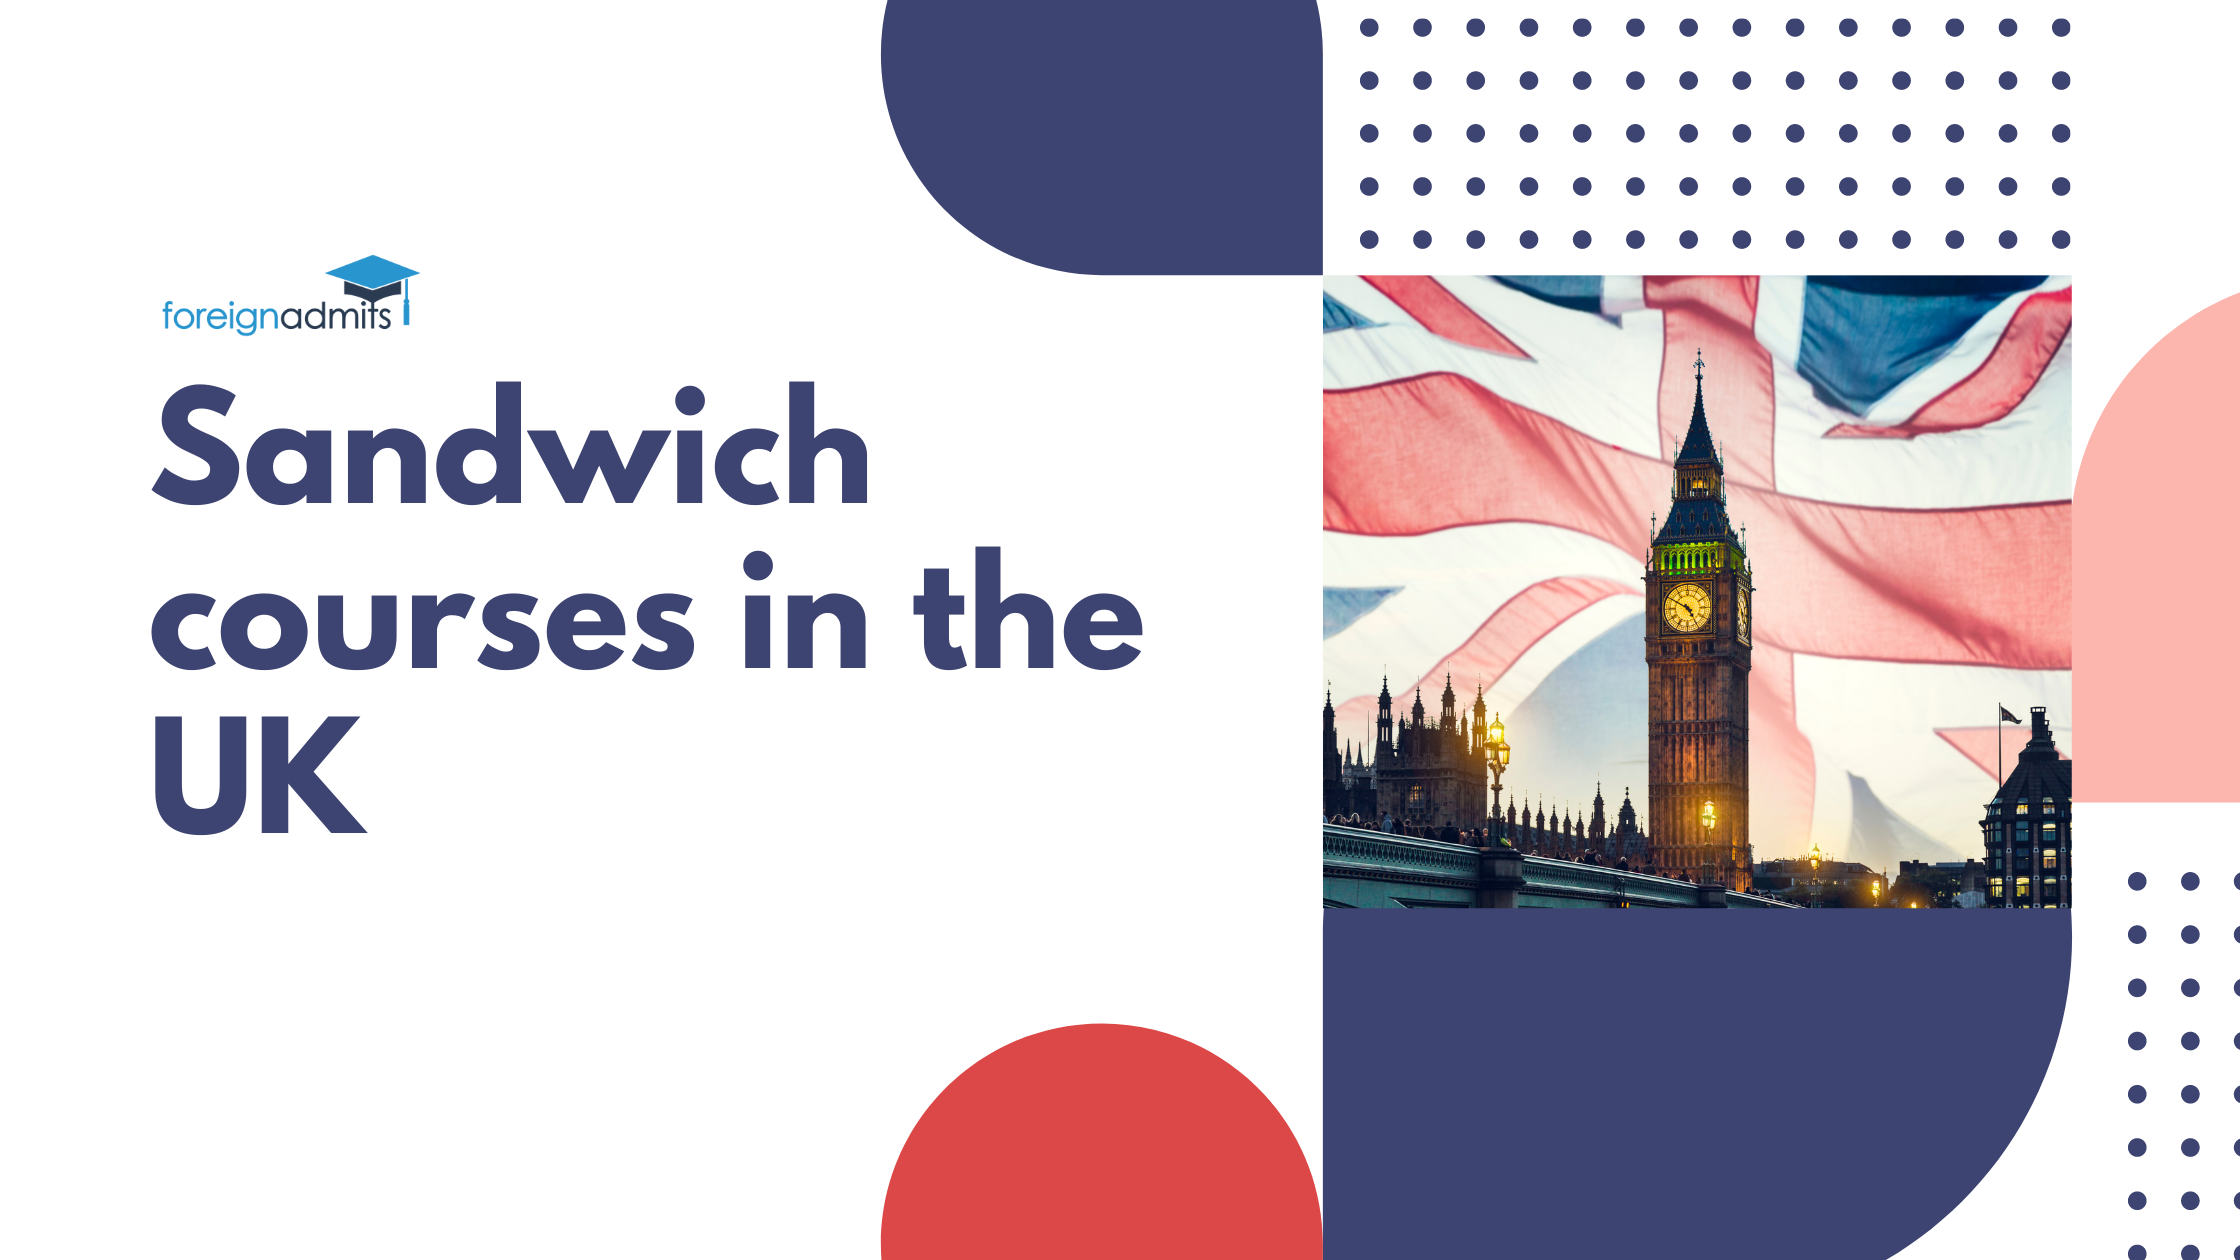 Sandwich courses in the UK